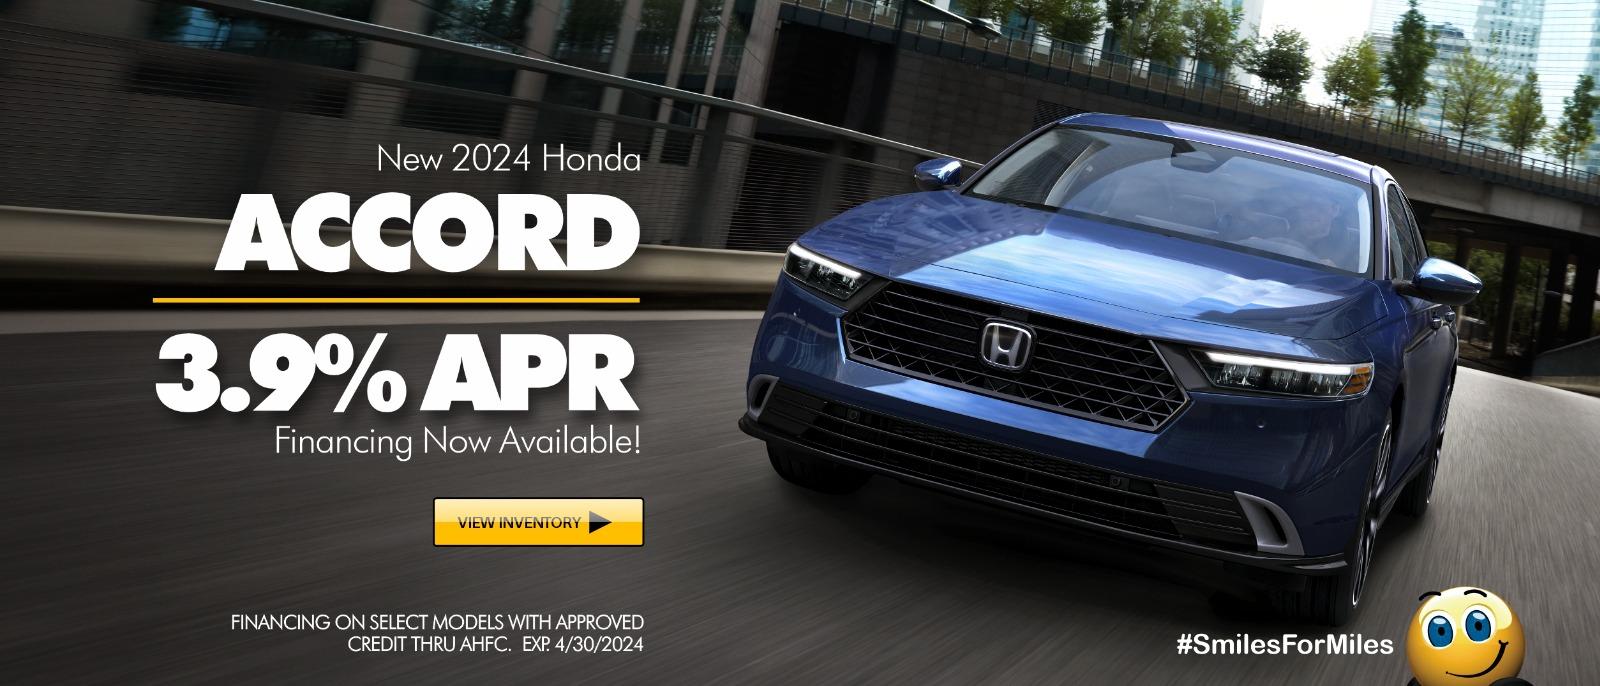 2024 Honda Accord - 3.9% APR Now available